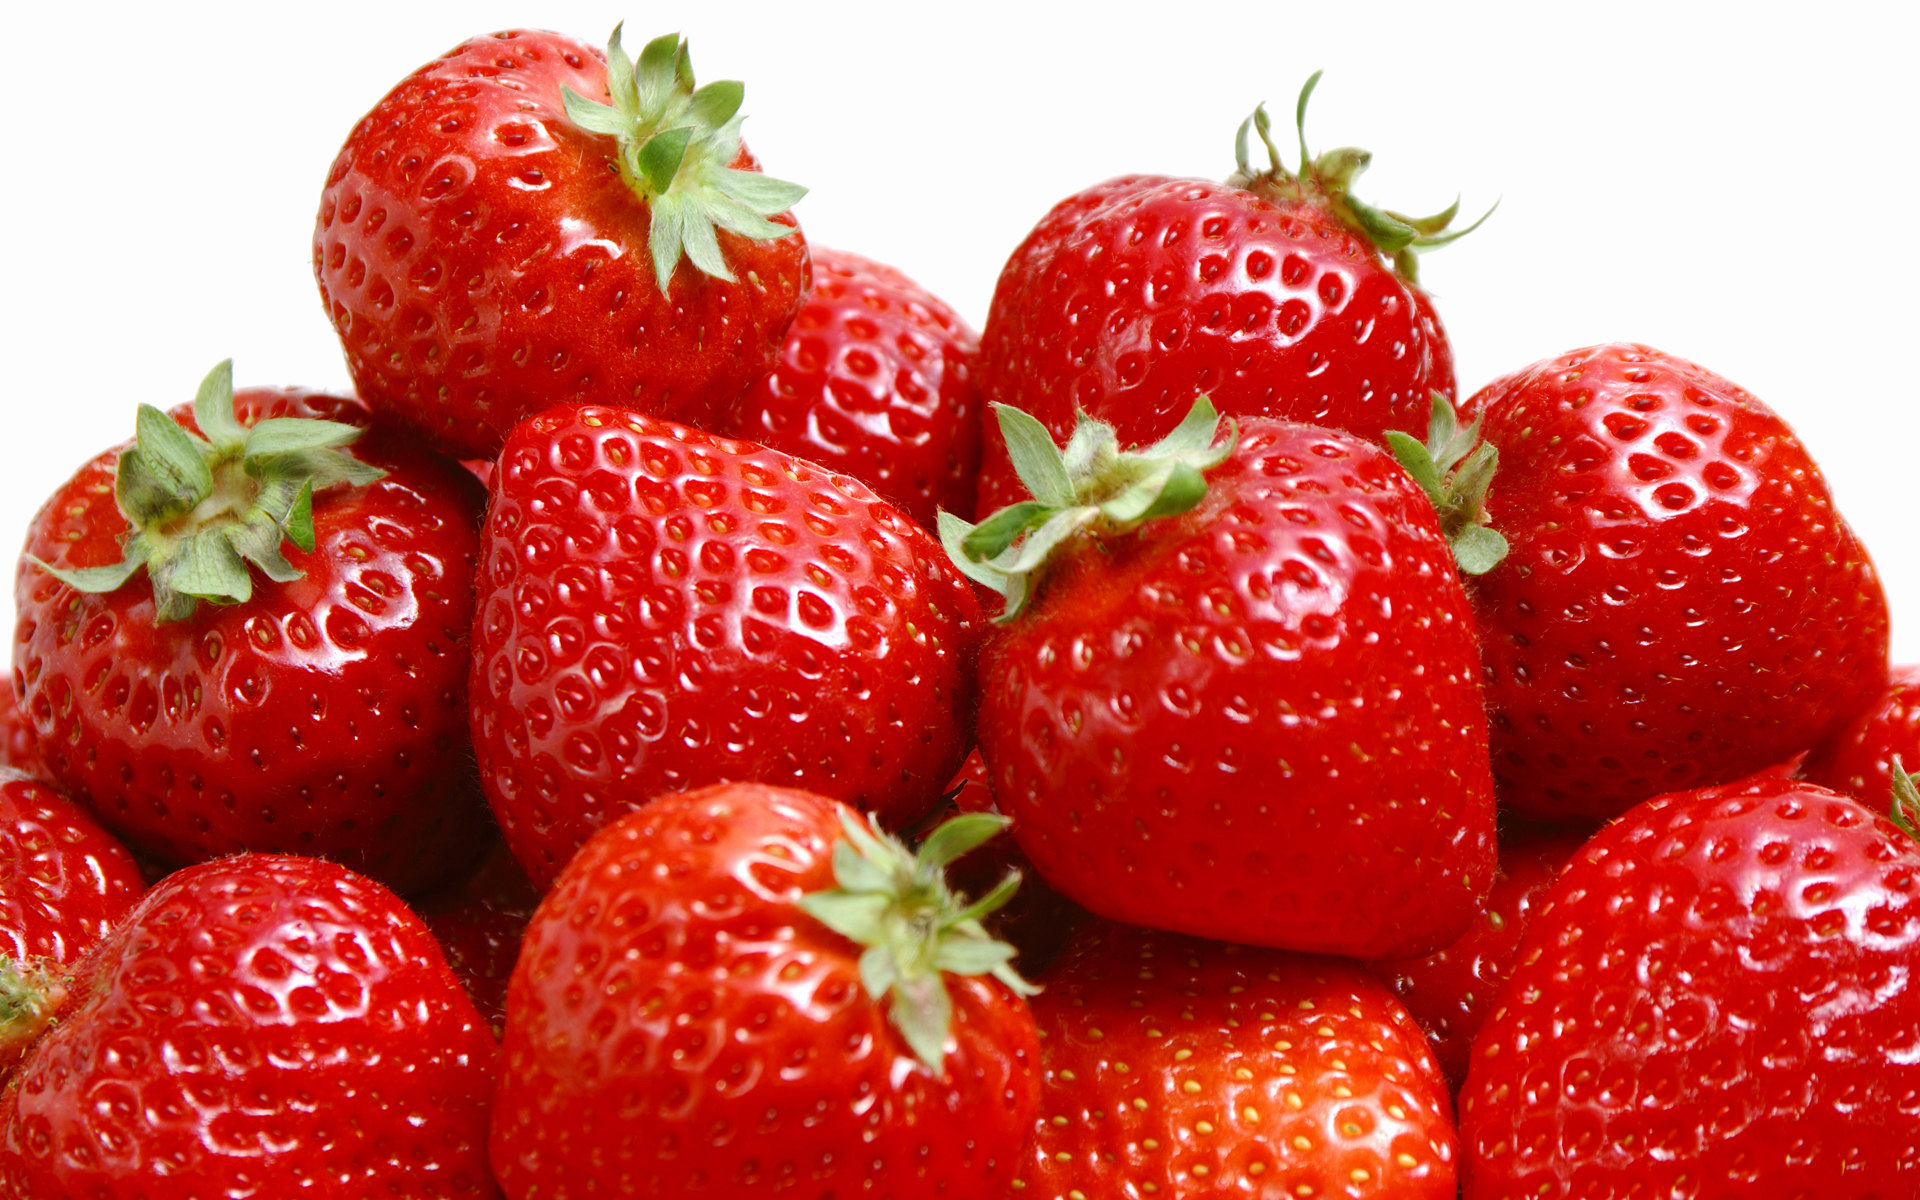 strawberries are healthy